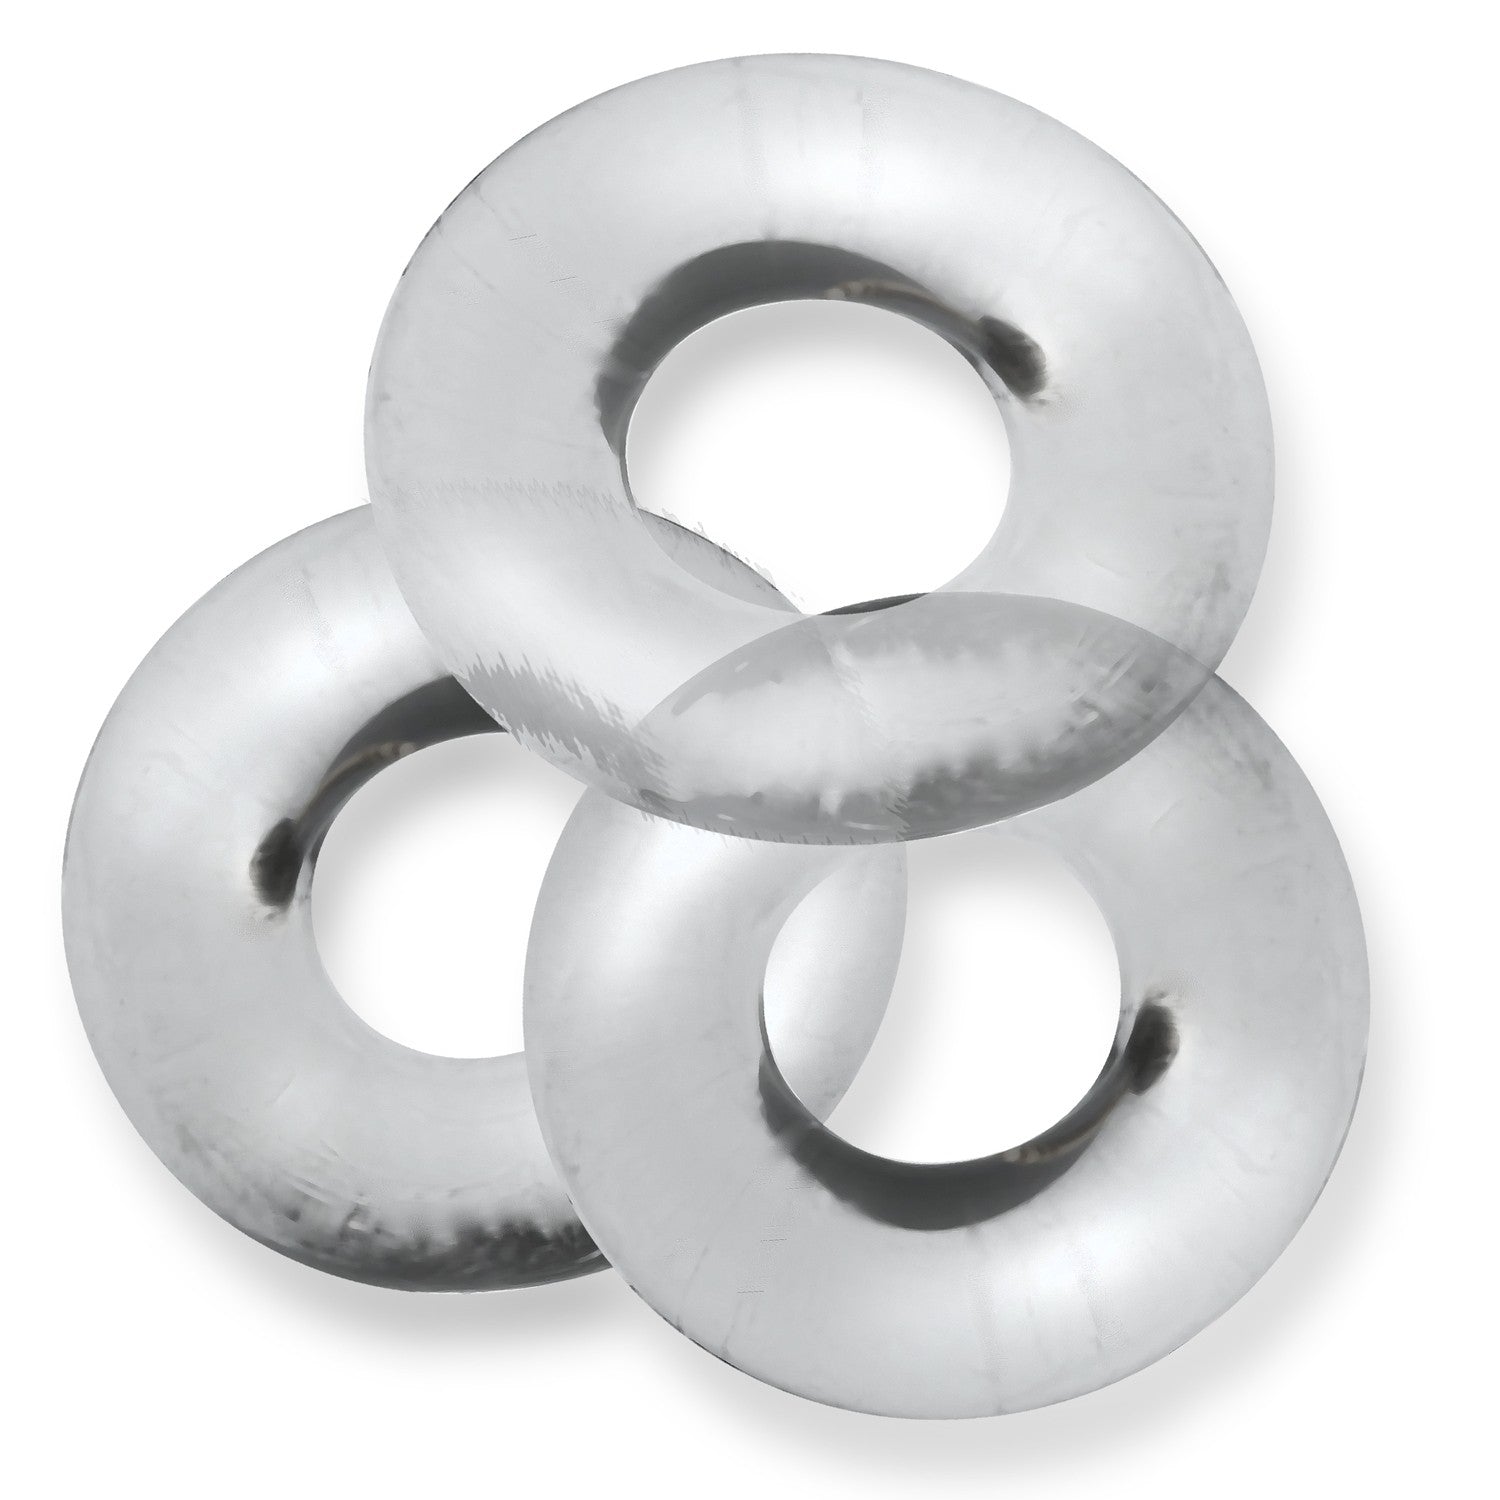 Oxballs Fat Willy 3-Pack Jumbo Cock Ring - XOXTOYS